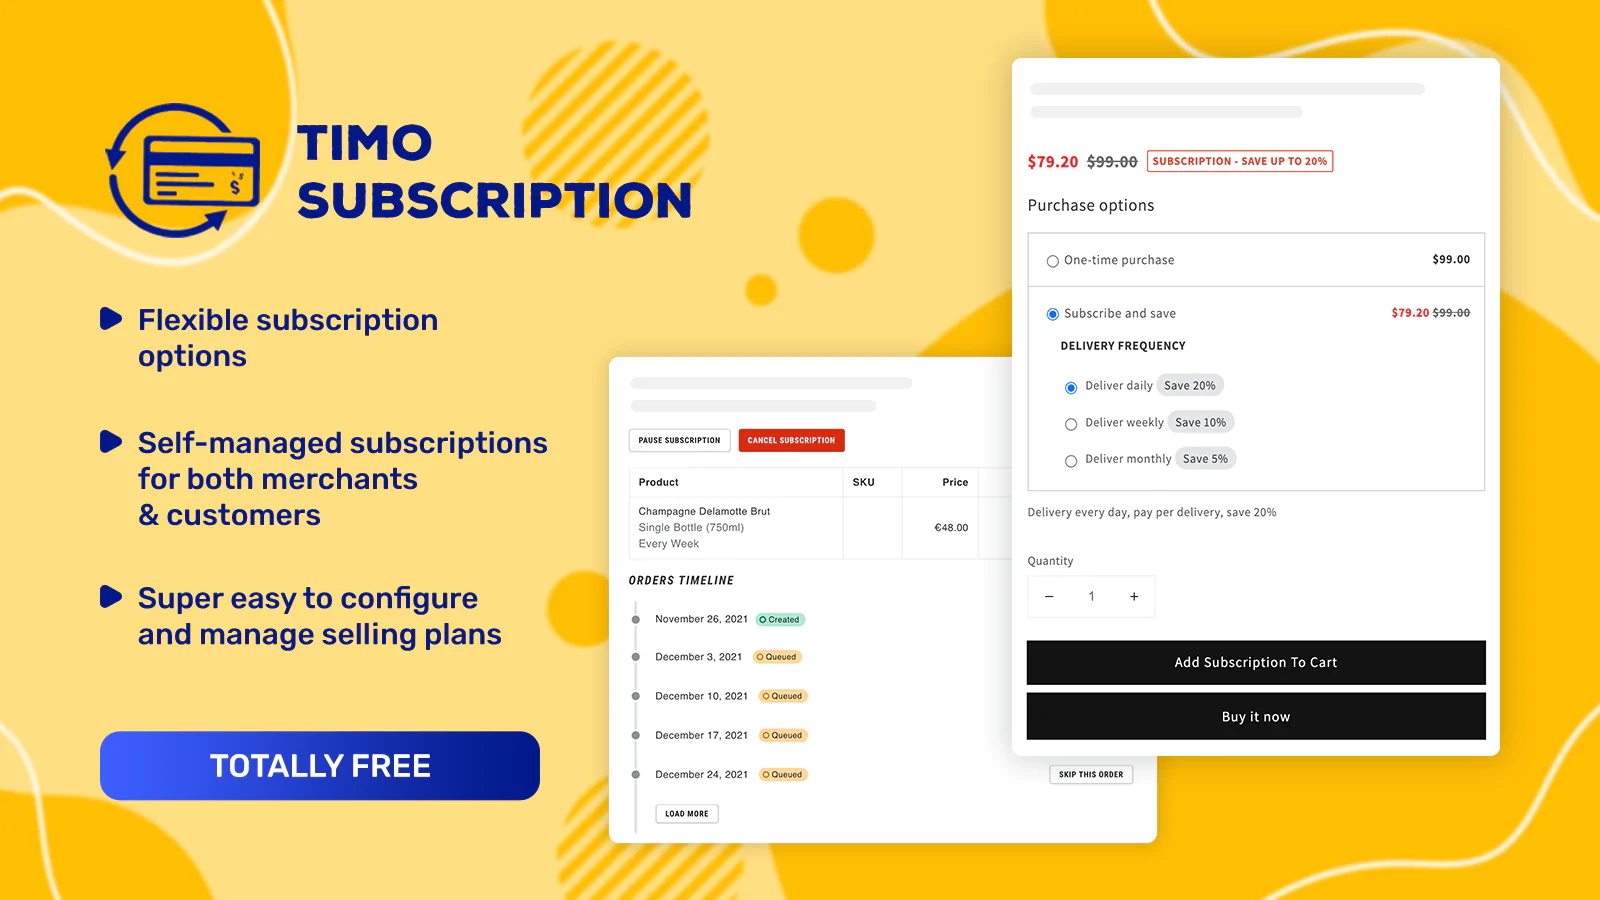 Timo Subscriptions